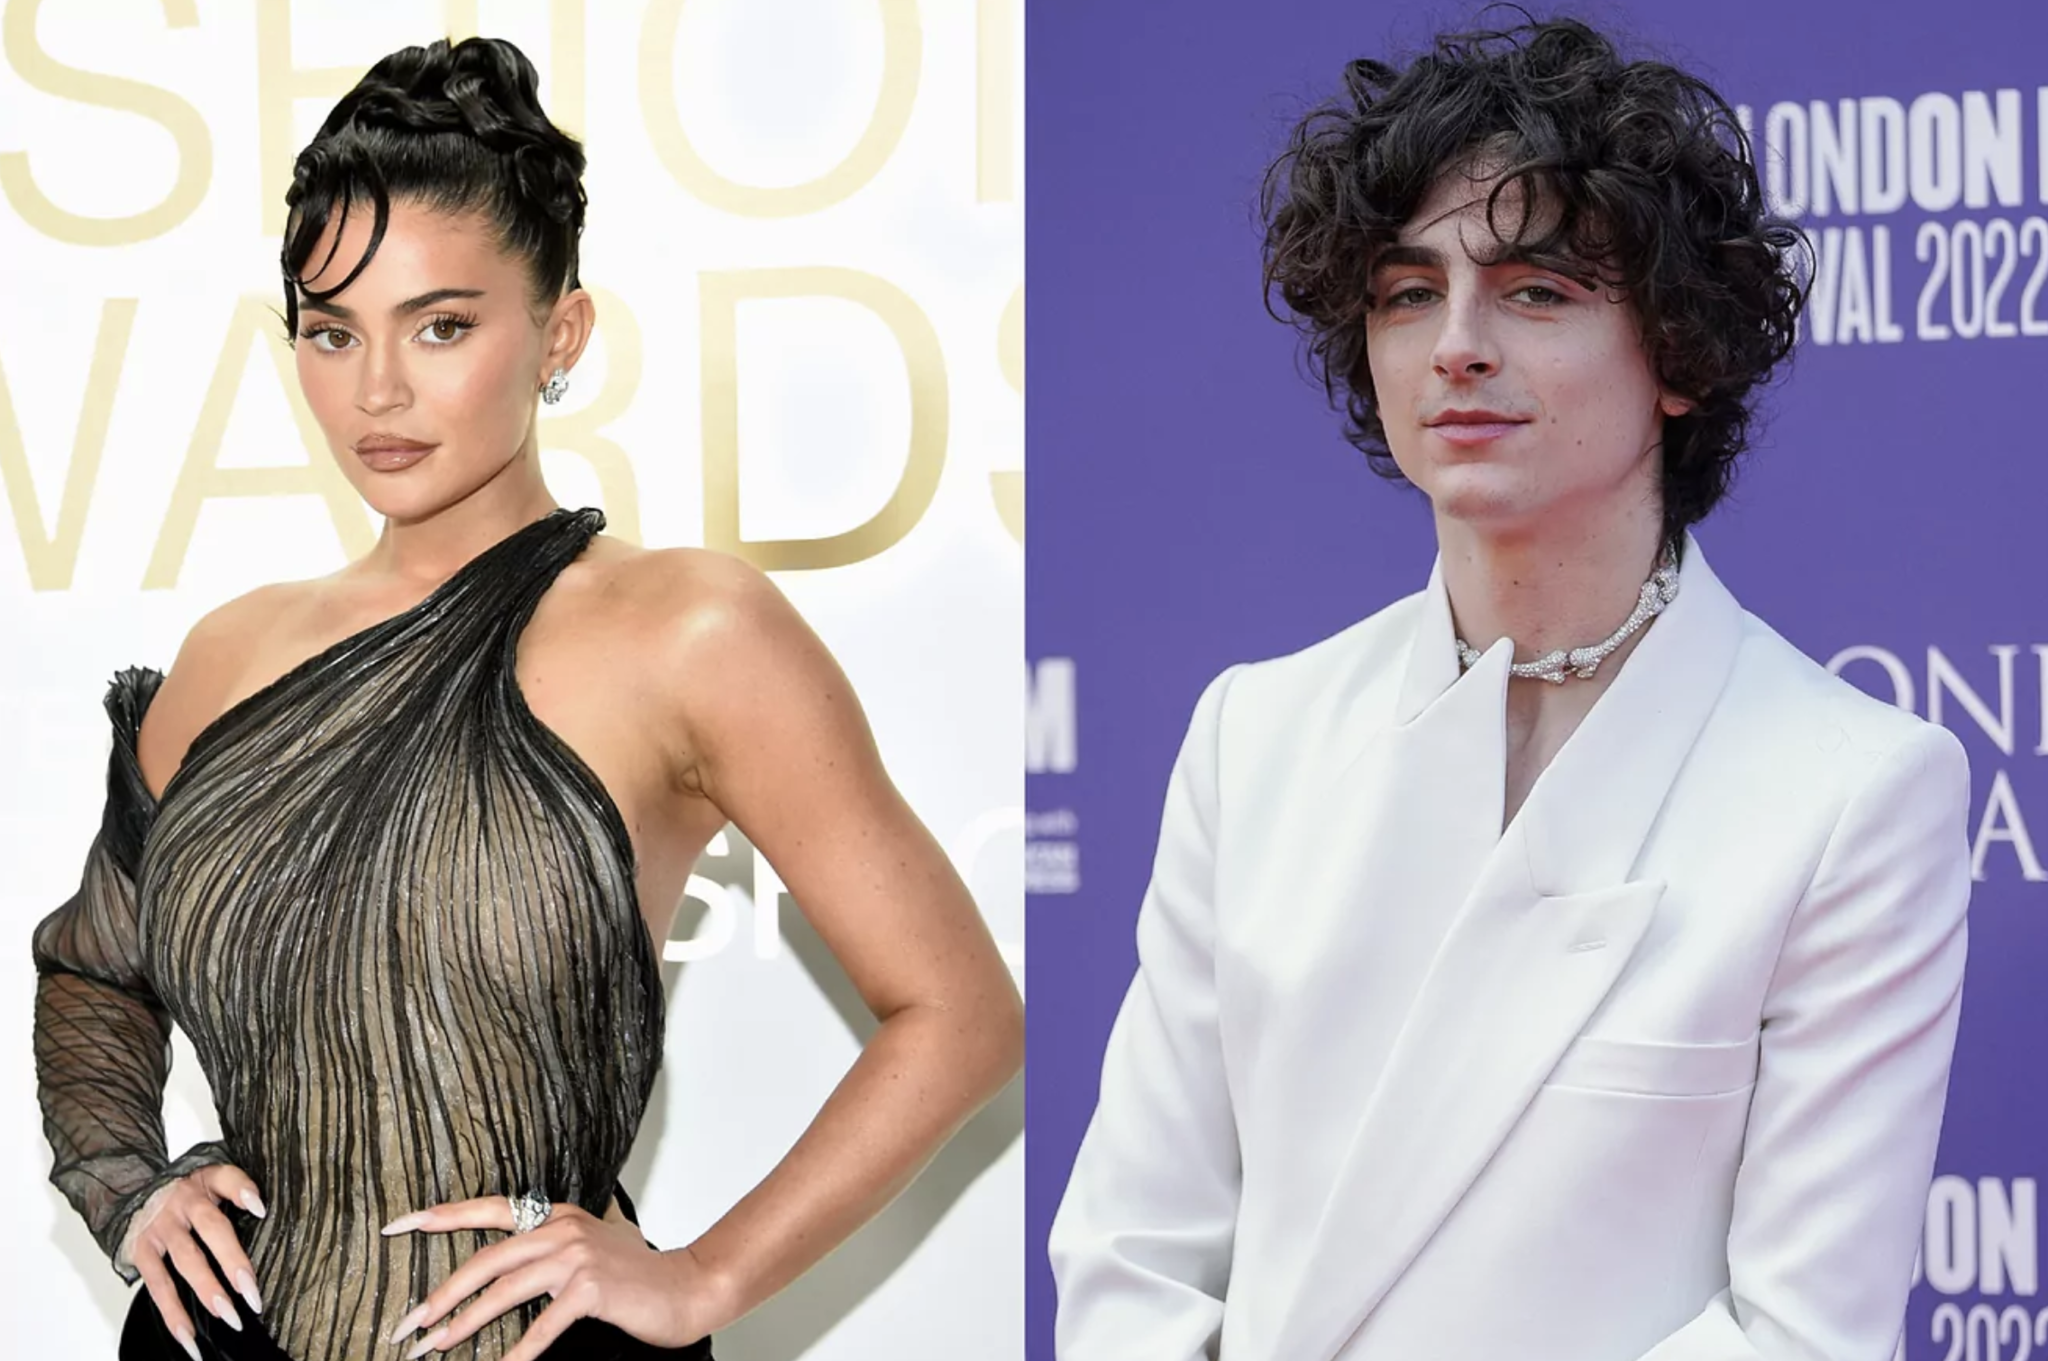 Kylie Jenners romance with Timothee Chalamet not serious